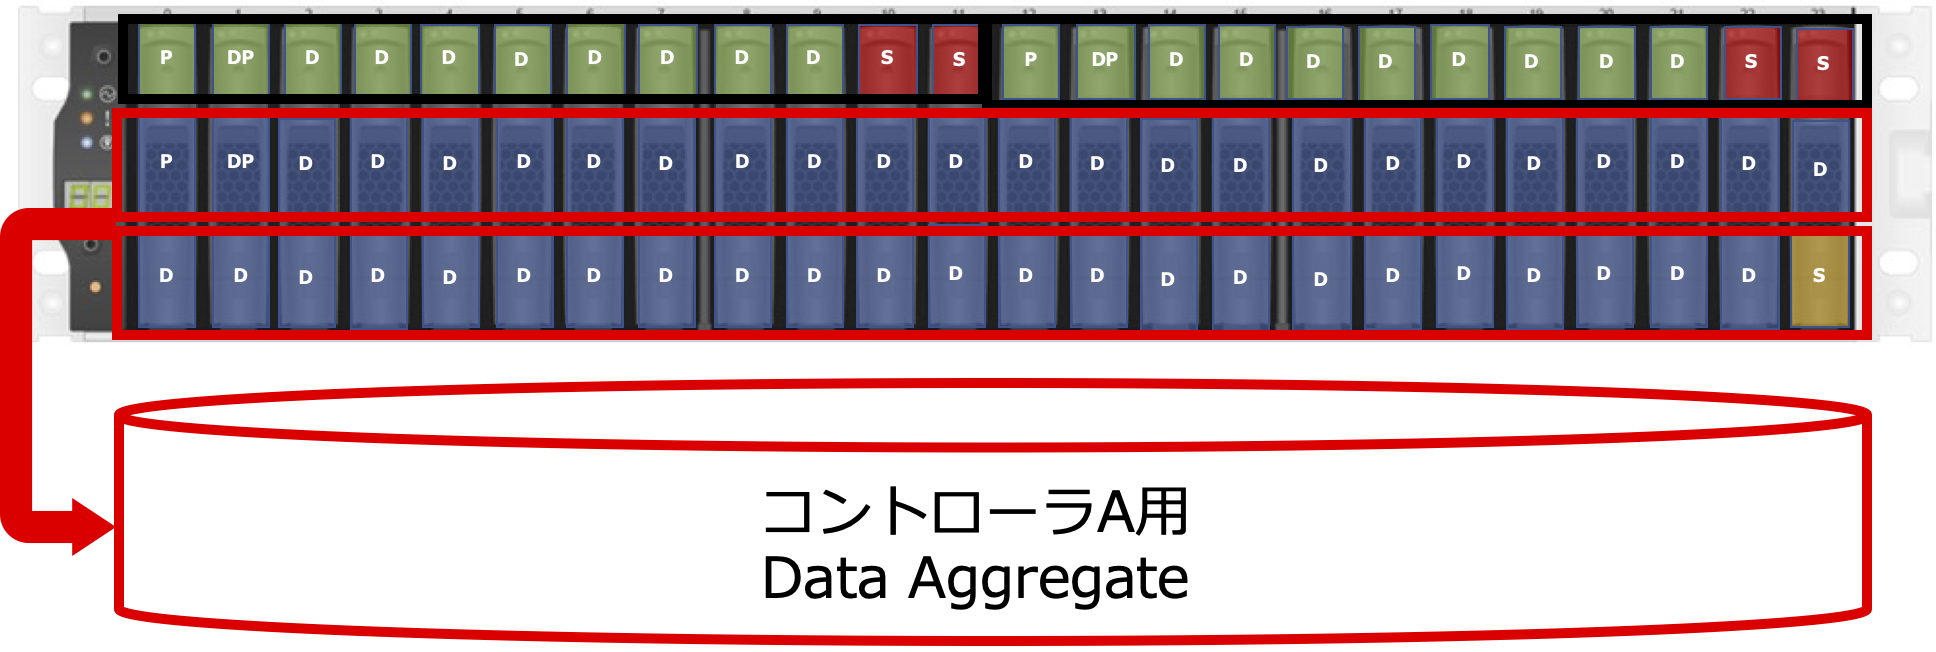 Active-Standby_Data_Aggregate.png